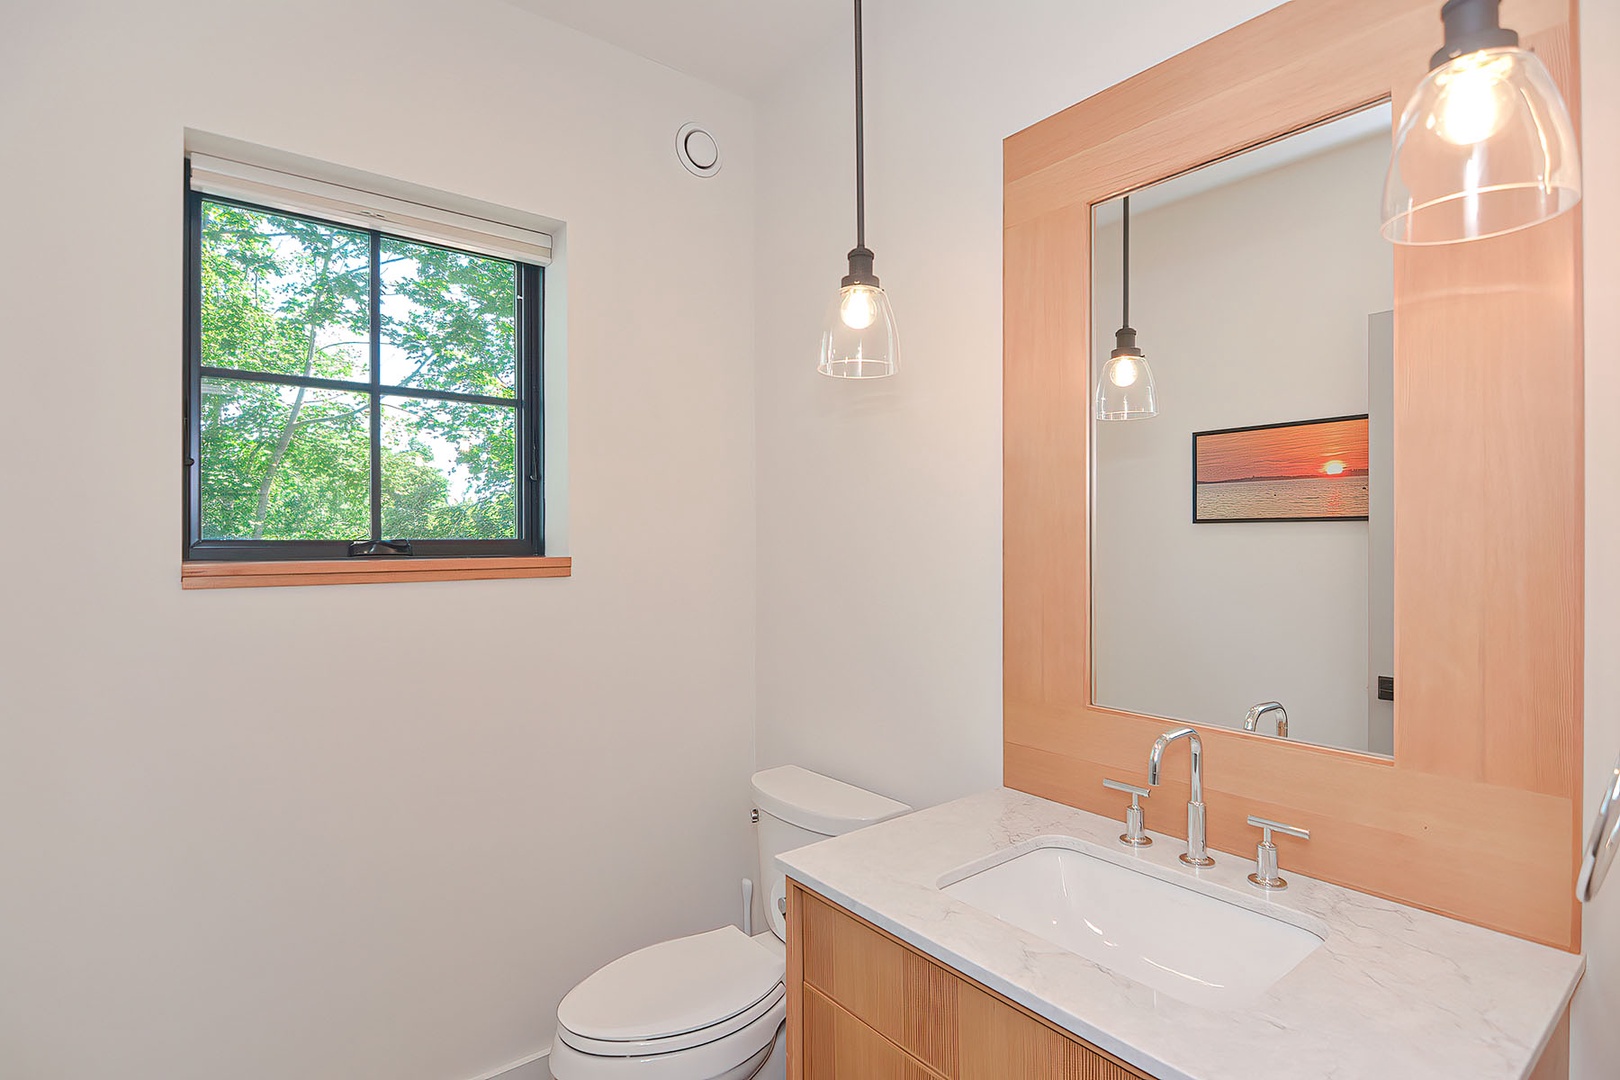 A half bath, right off the entryway, completes the main floor.